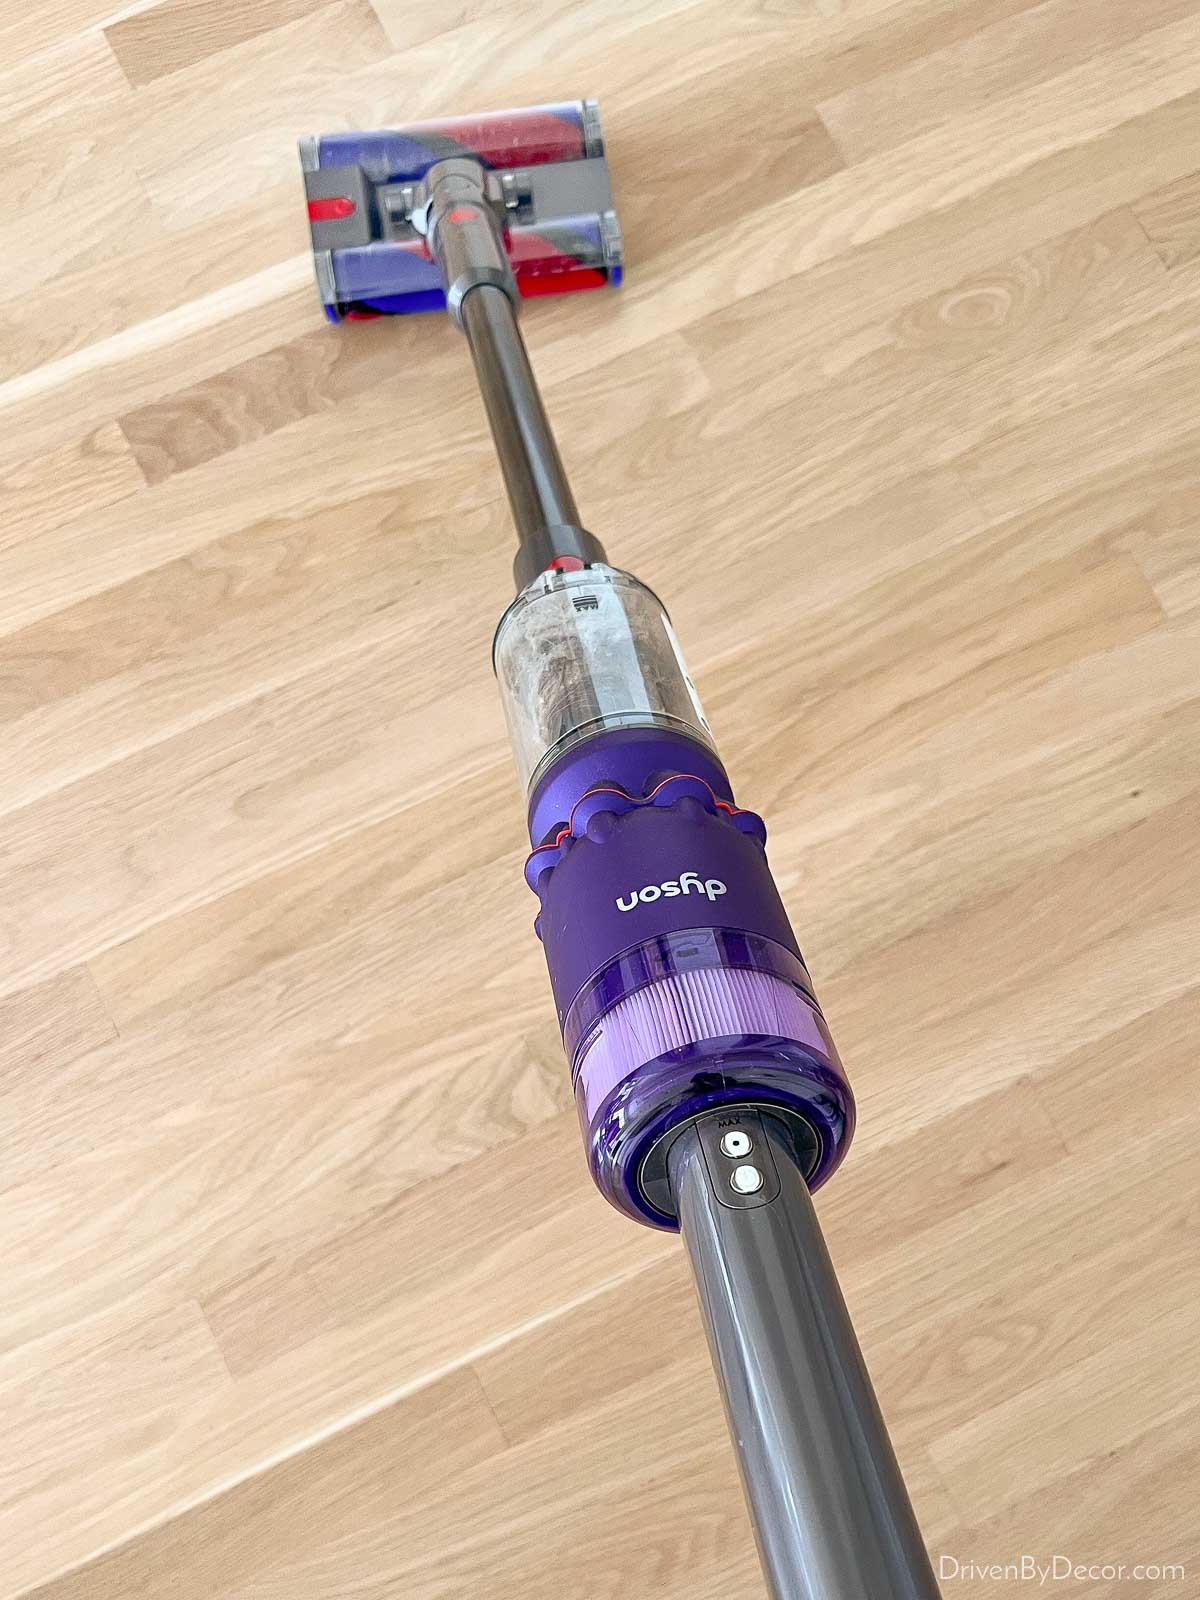 https://www.drivenbydecor.com/wp-content/uploads/2022/03/cleaning-tools-dyson-omniglide.jpeg